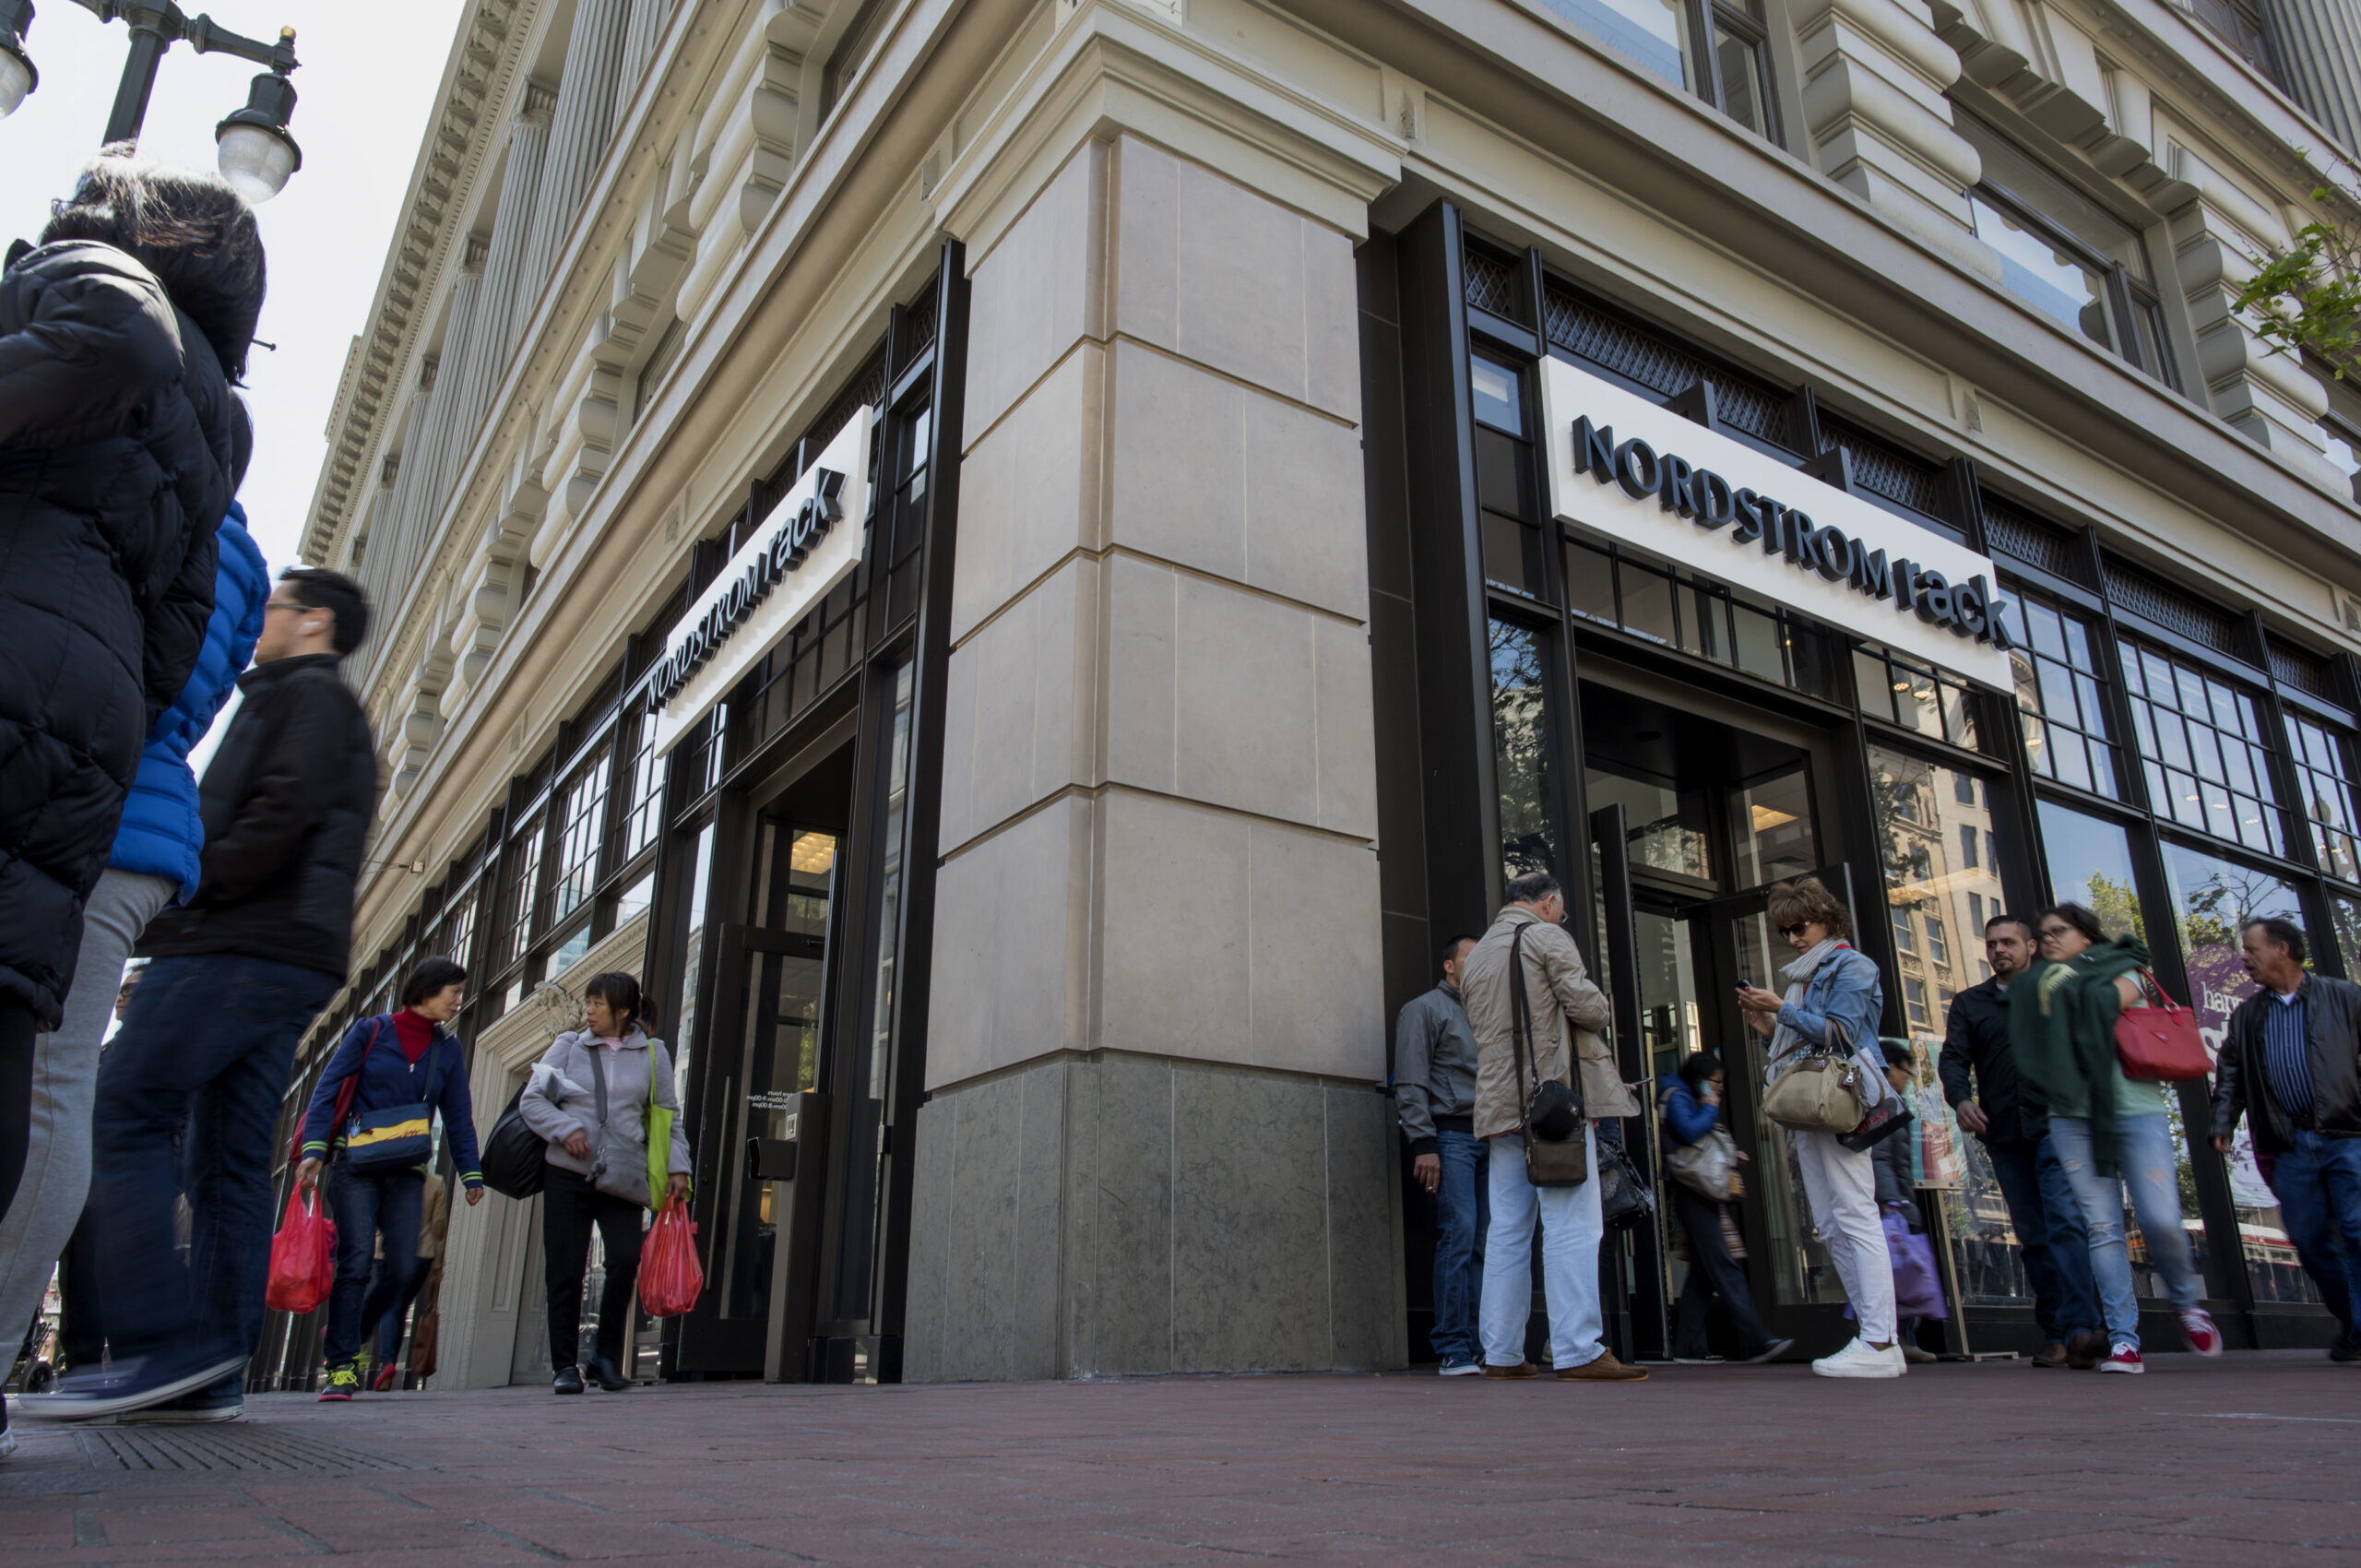 Nordstrom closing San Francisco stores due to deteriorating conditions.